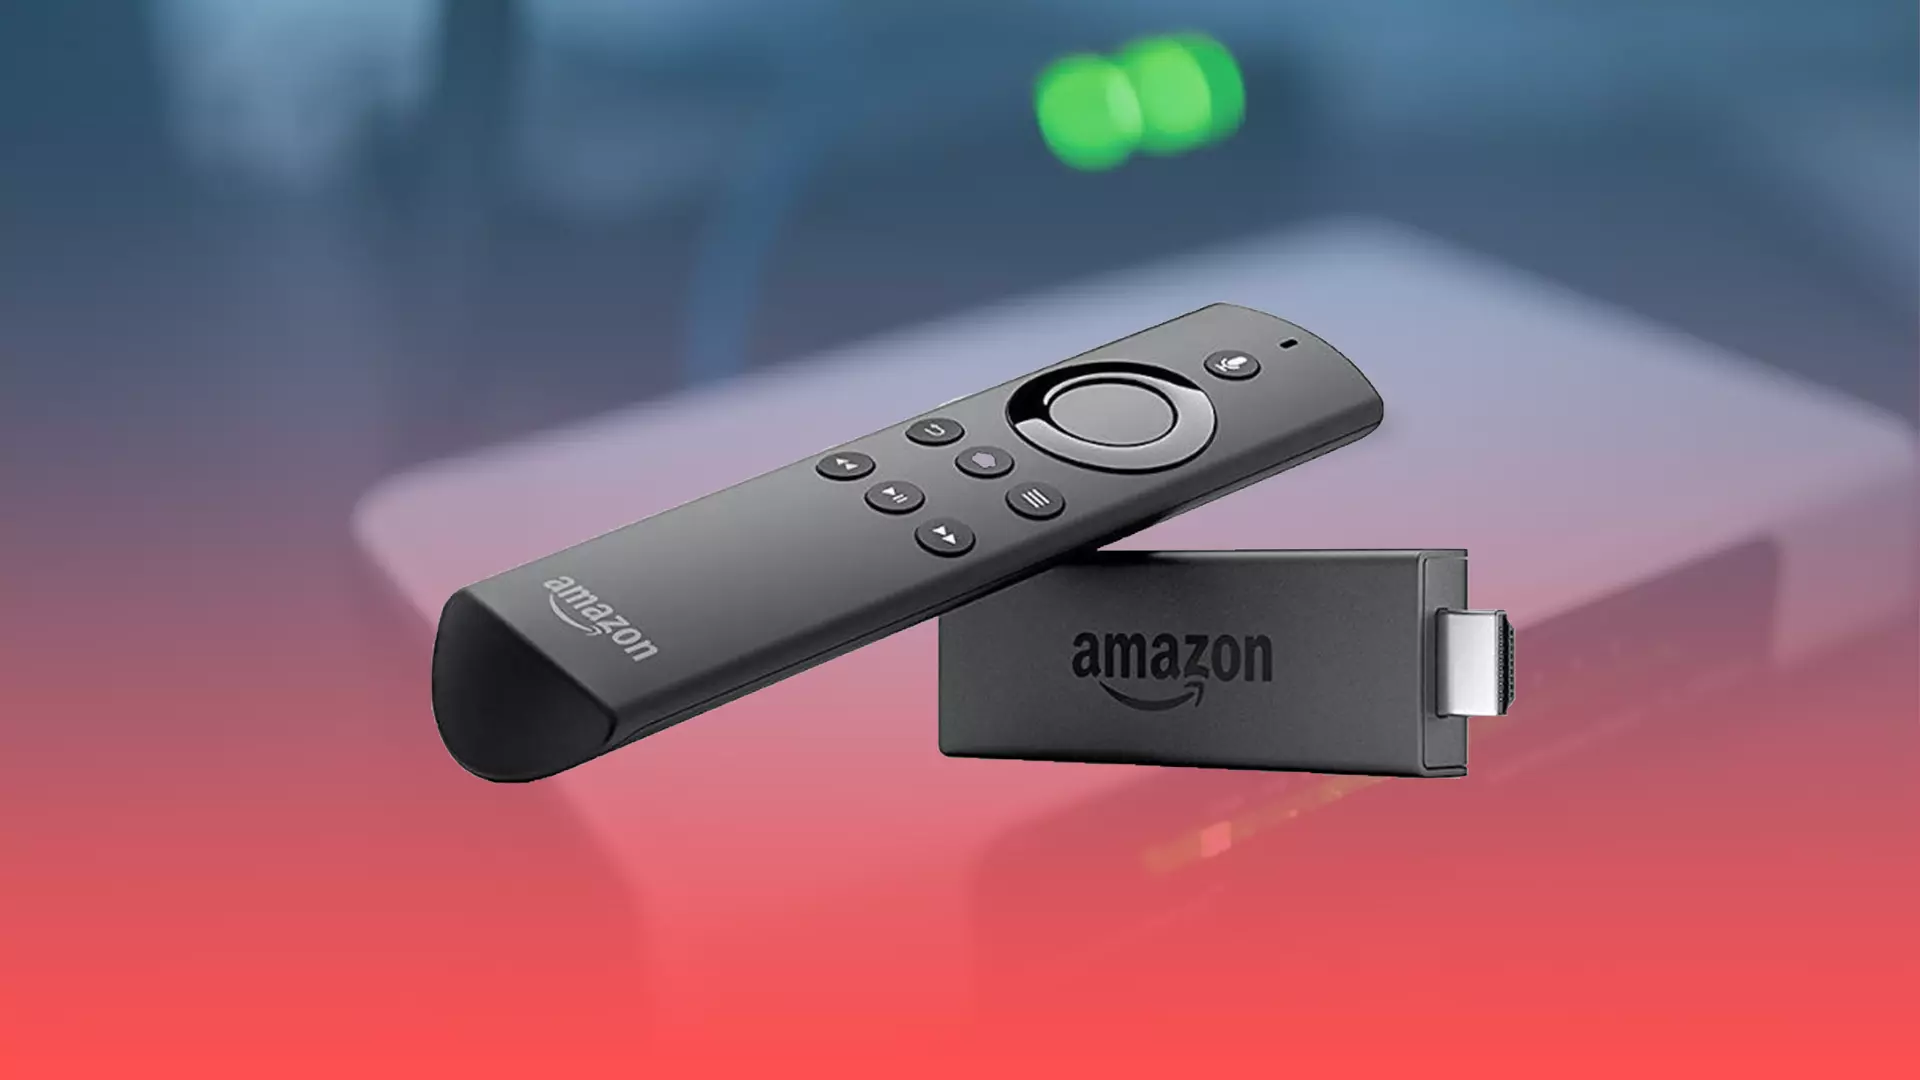 How to connect Amazon Fire Stick to Wi-Fi